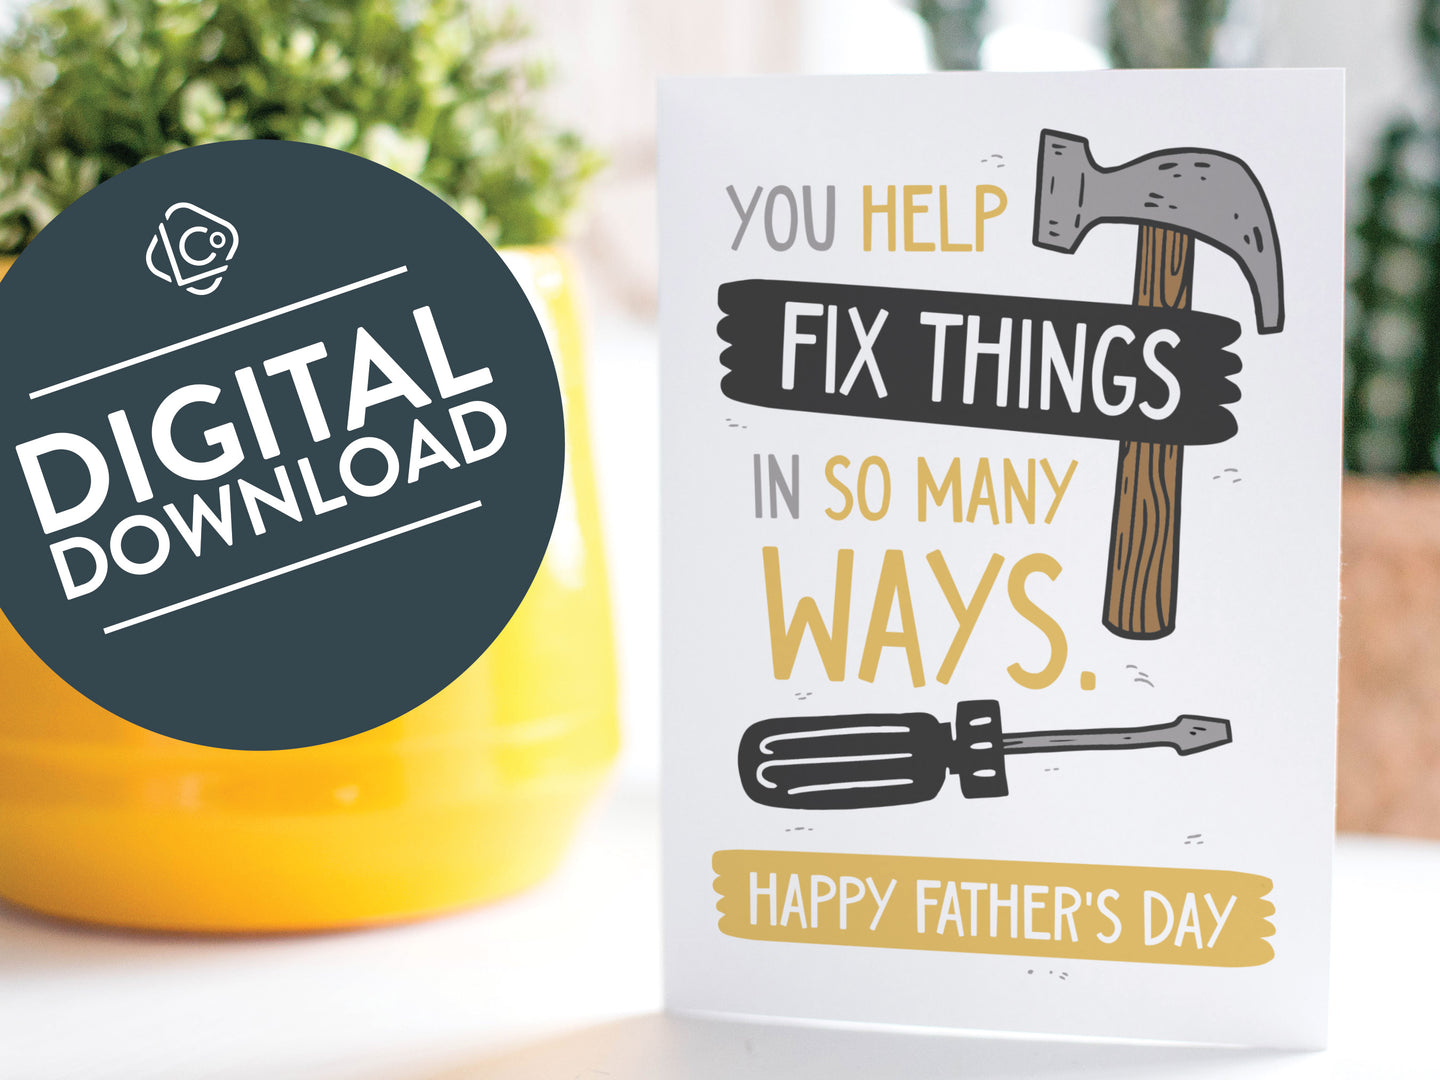 A greeting card is on a table top with a yellow plant pot and a green plant inside. The card features the words “You Help Fix Things in so Many Ways, Happy Father's Day” with an illustrated hammer and screwdriver around the words. The words 